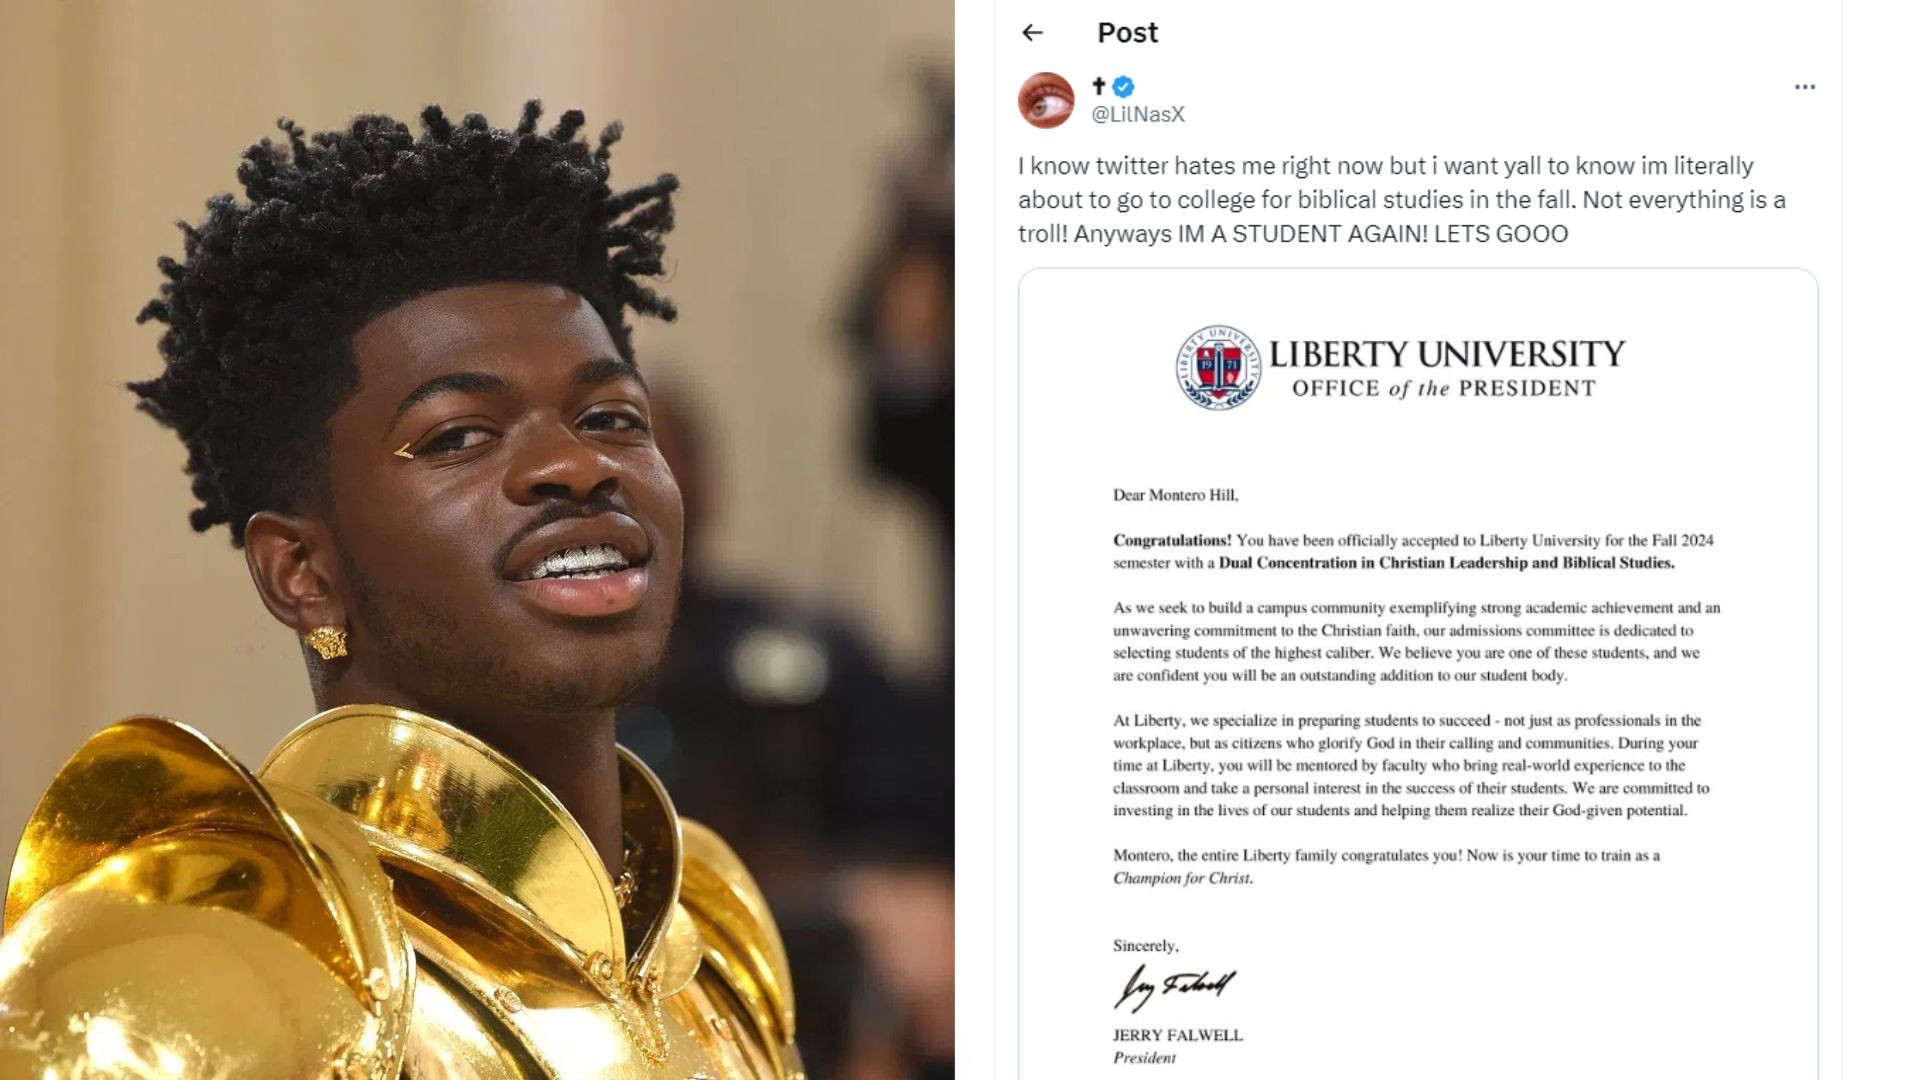 lil-nas-x-falsely-claims-acceptance-to-christian-liberty-university